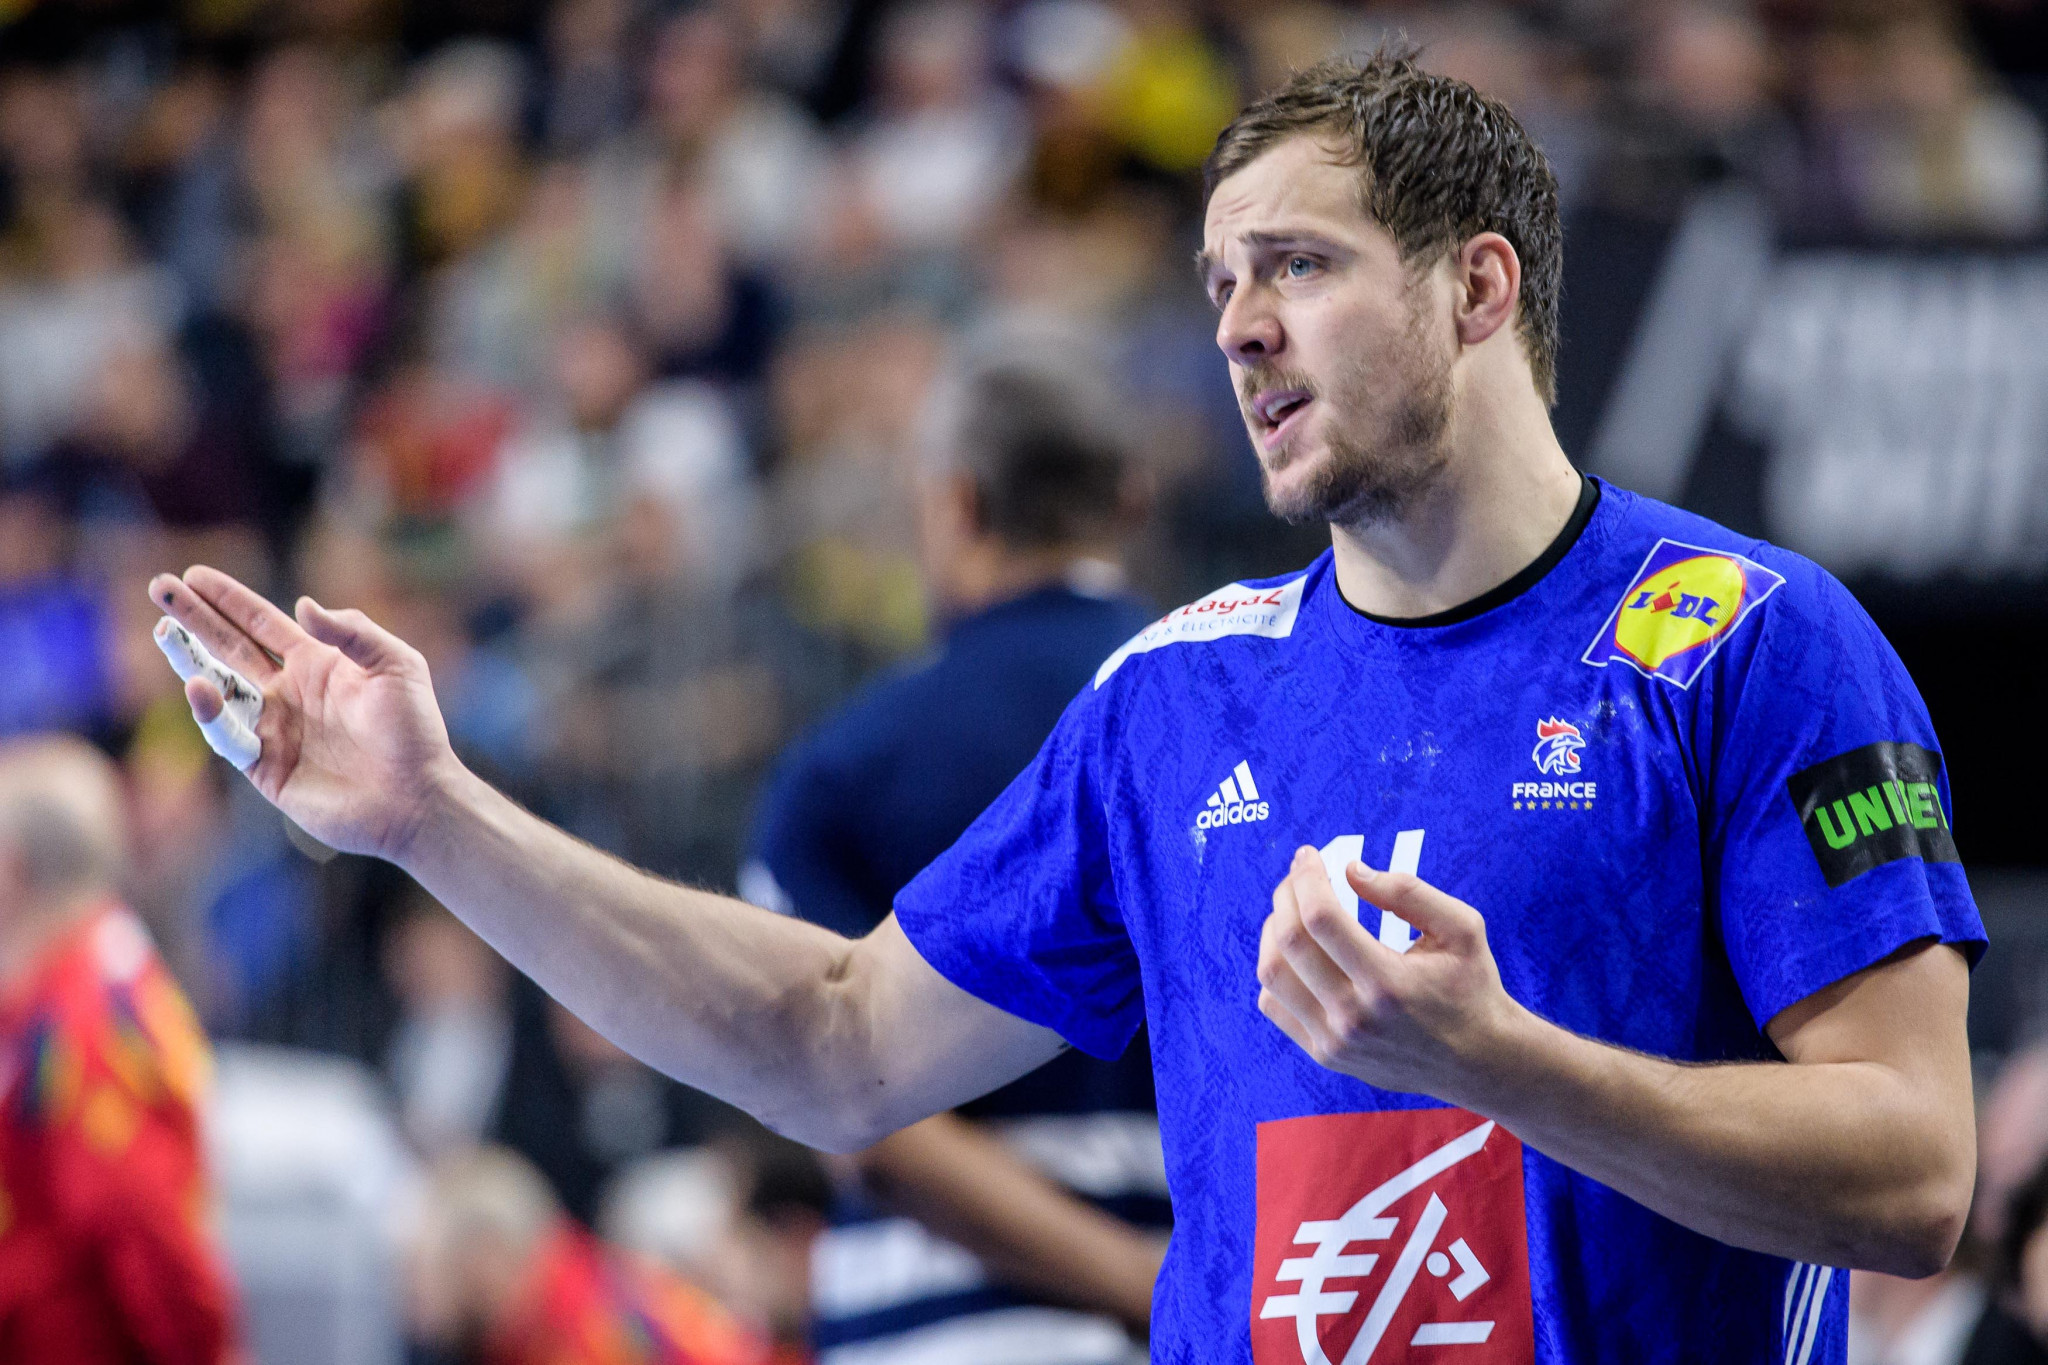 France and Slovenia continue winning form at IHF World Championship 